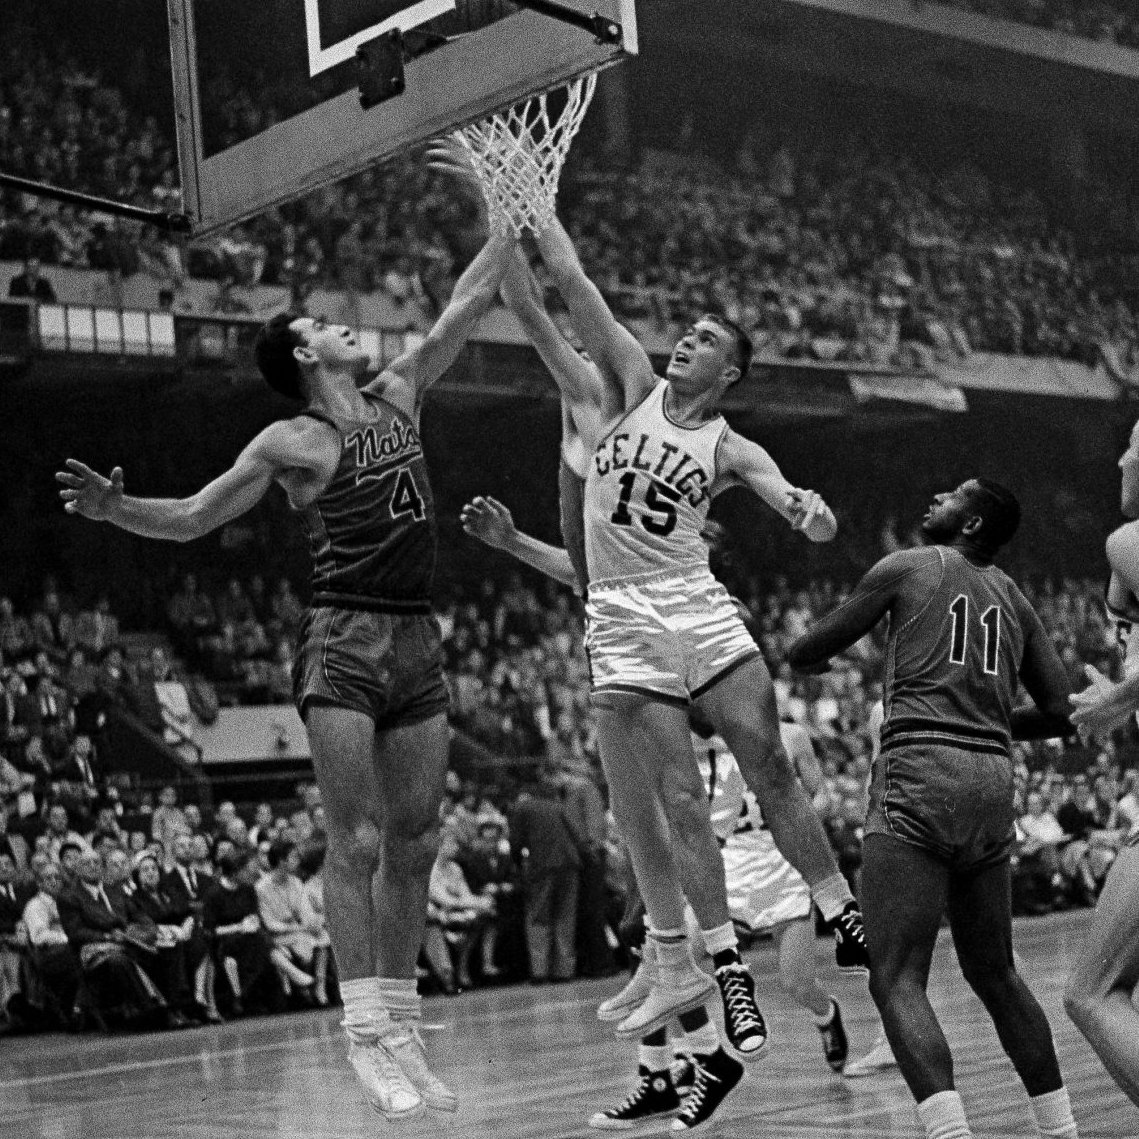 Like Bird, Schayes was an underrated defender:DWS/48: .078 Schayes.082 BirdSchayes anchored Nats' D, which was typically 2nd in NBA (Behind Mikan's Lakers in early 1950s; Russell's Celtics, 1957-on).In 1955, Schayes led in DWS and would have been DPOY that year, in IMO.